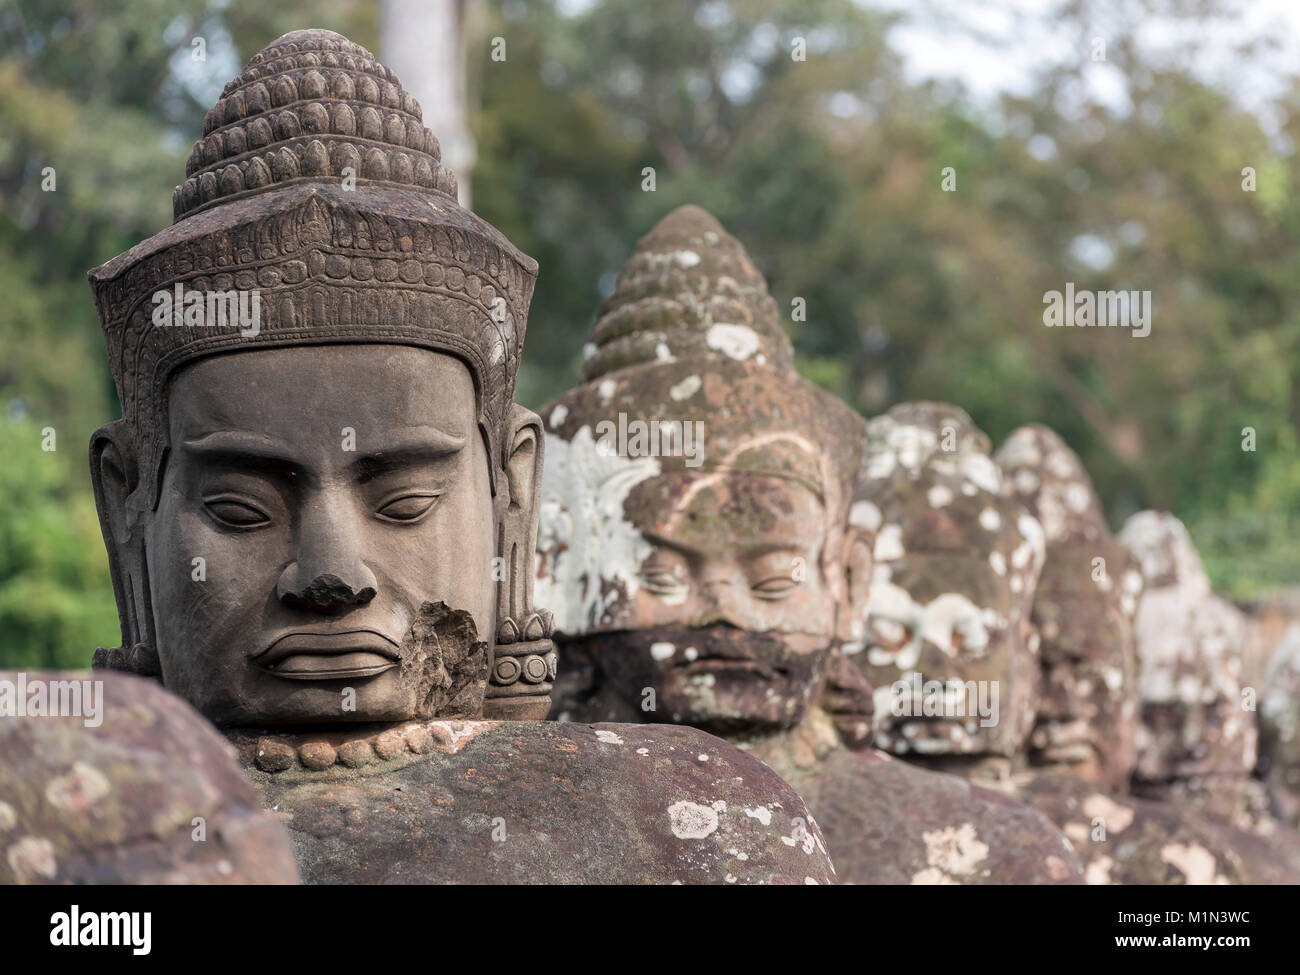 Faces of god statues along the stone bridge in front of the South Gate of Angkor Thom, Cambodia Stock Photo